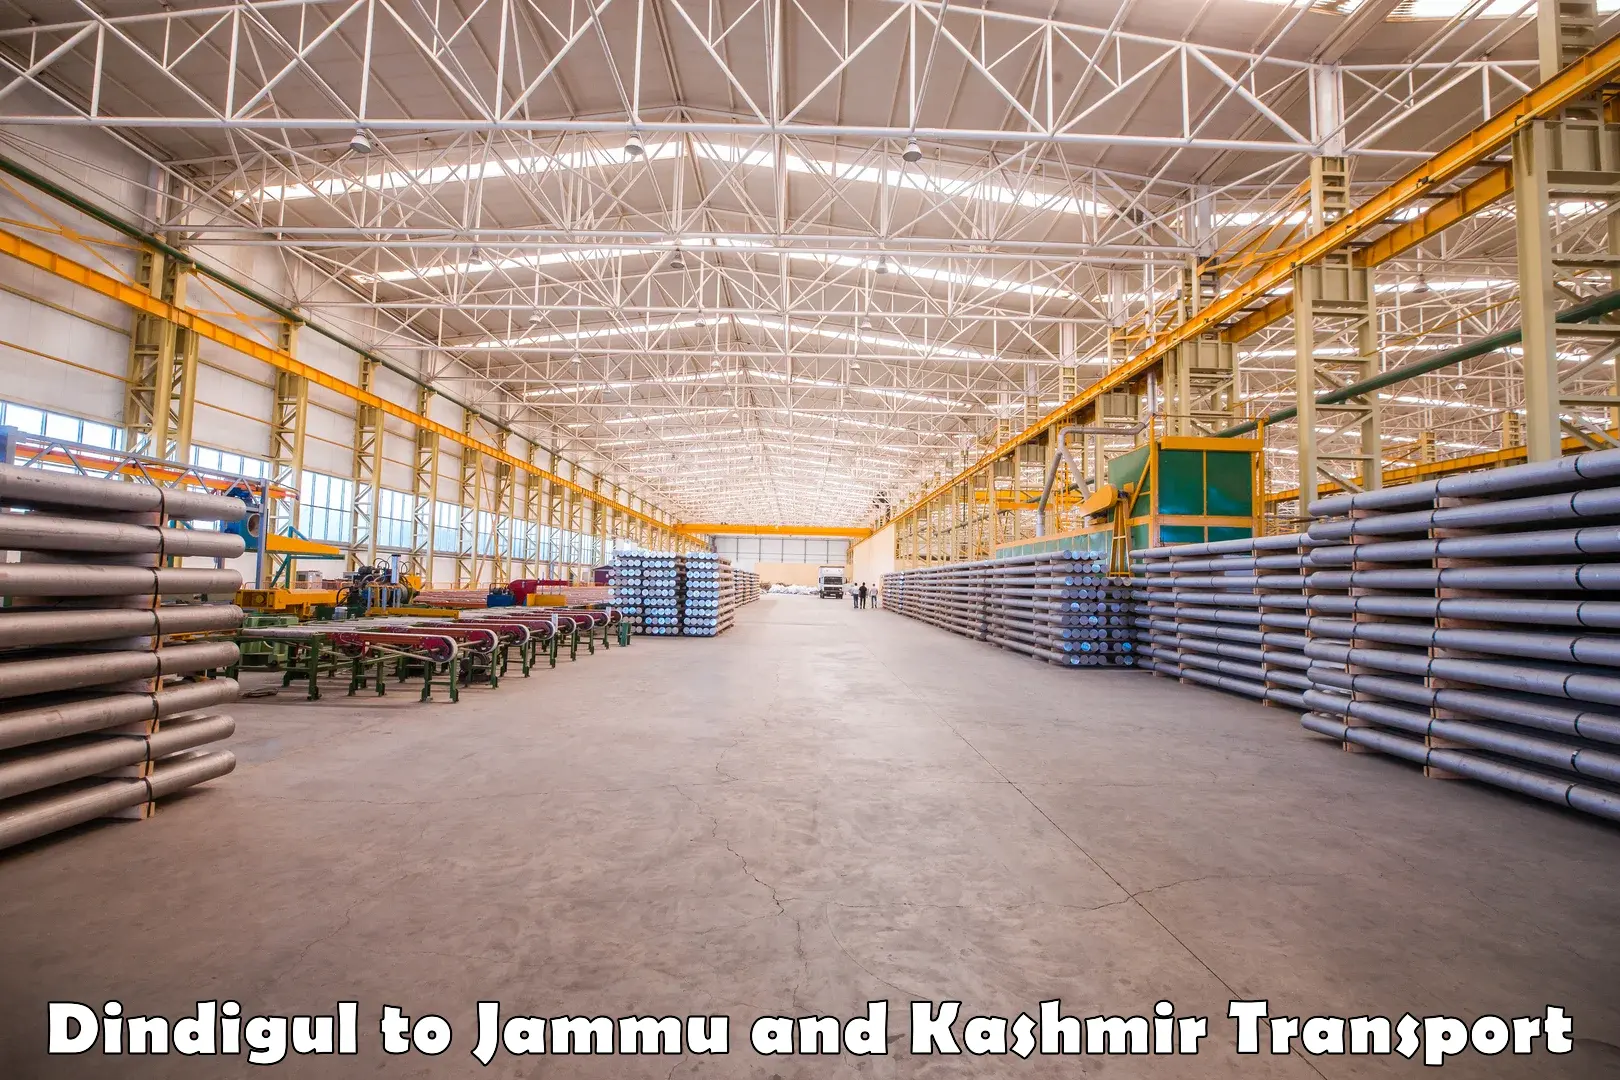 Truck transport companies in India Dindigul to Jammu and Kashmir